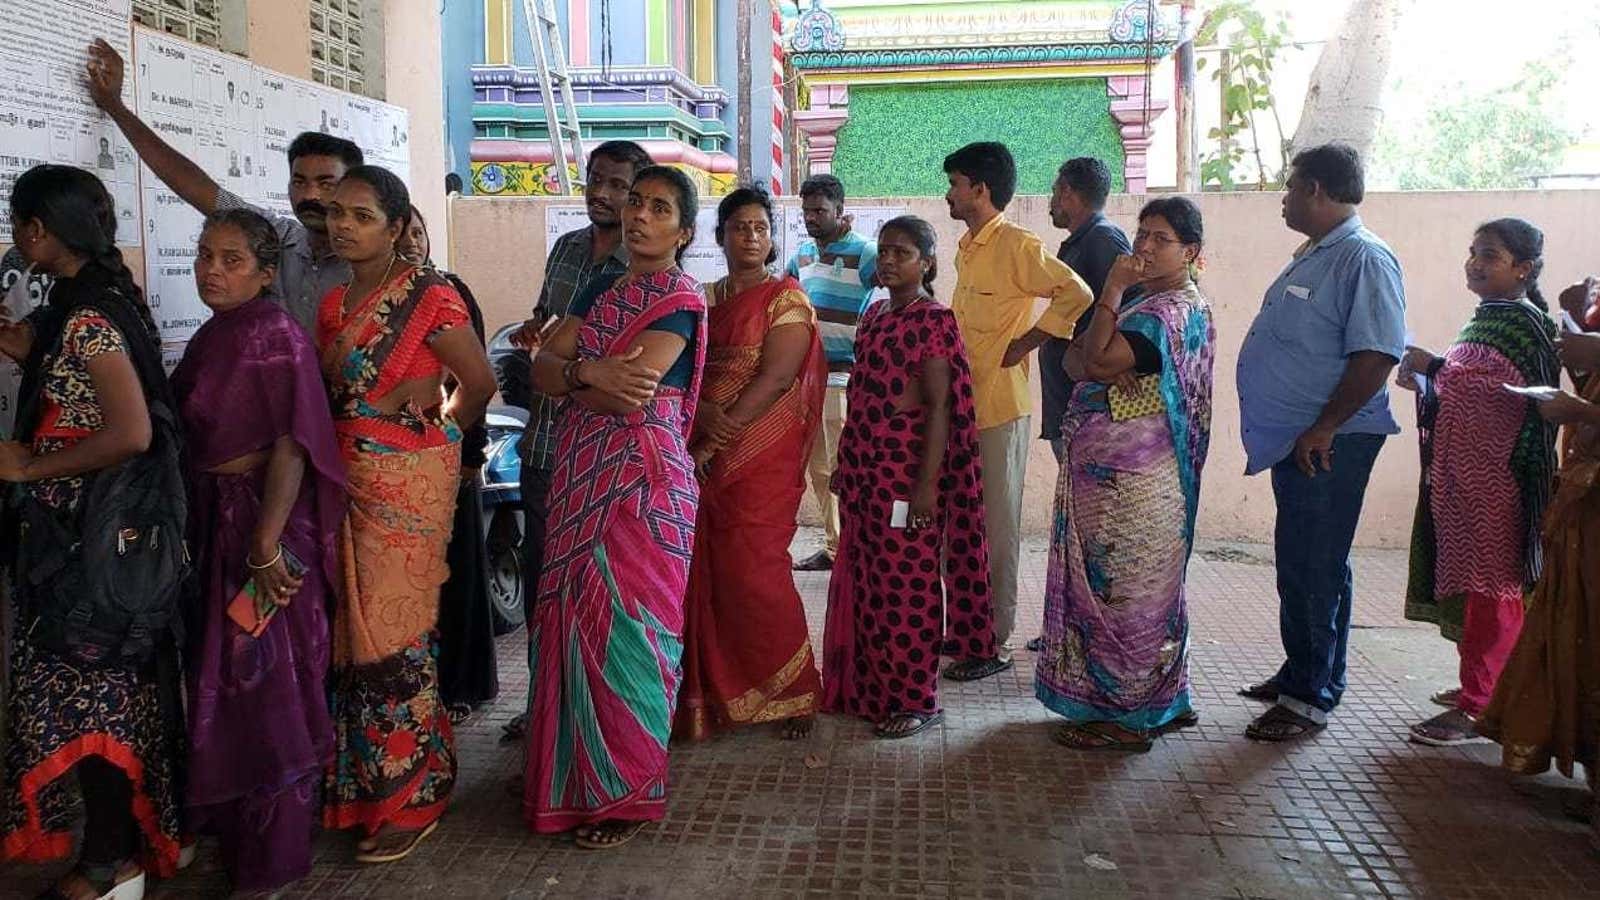 Wait in line to cast voted in Chennai.